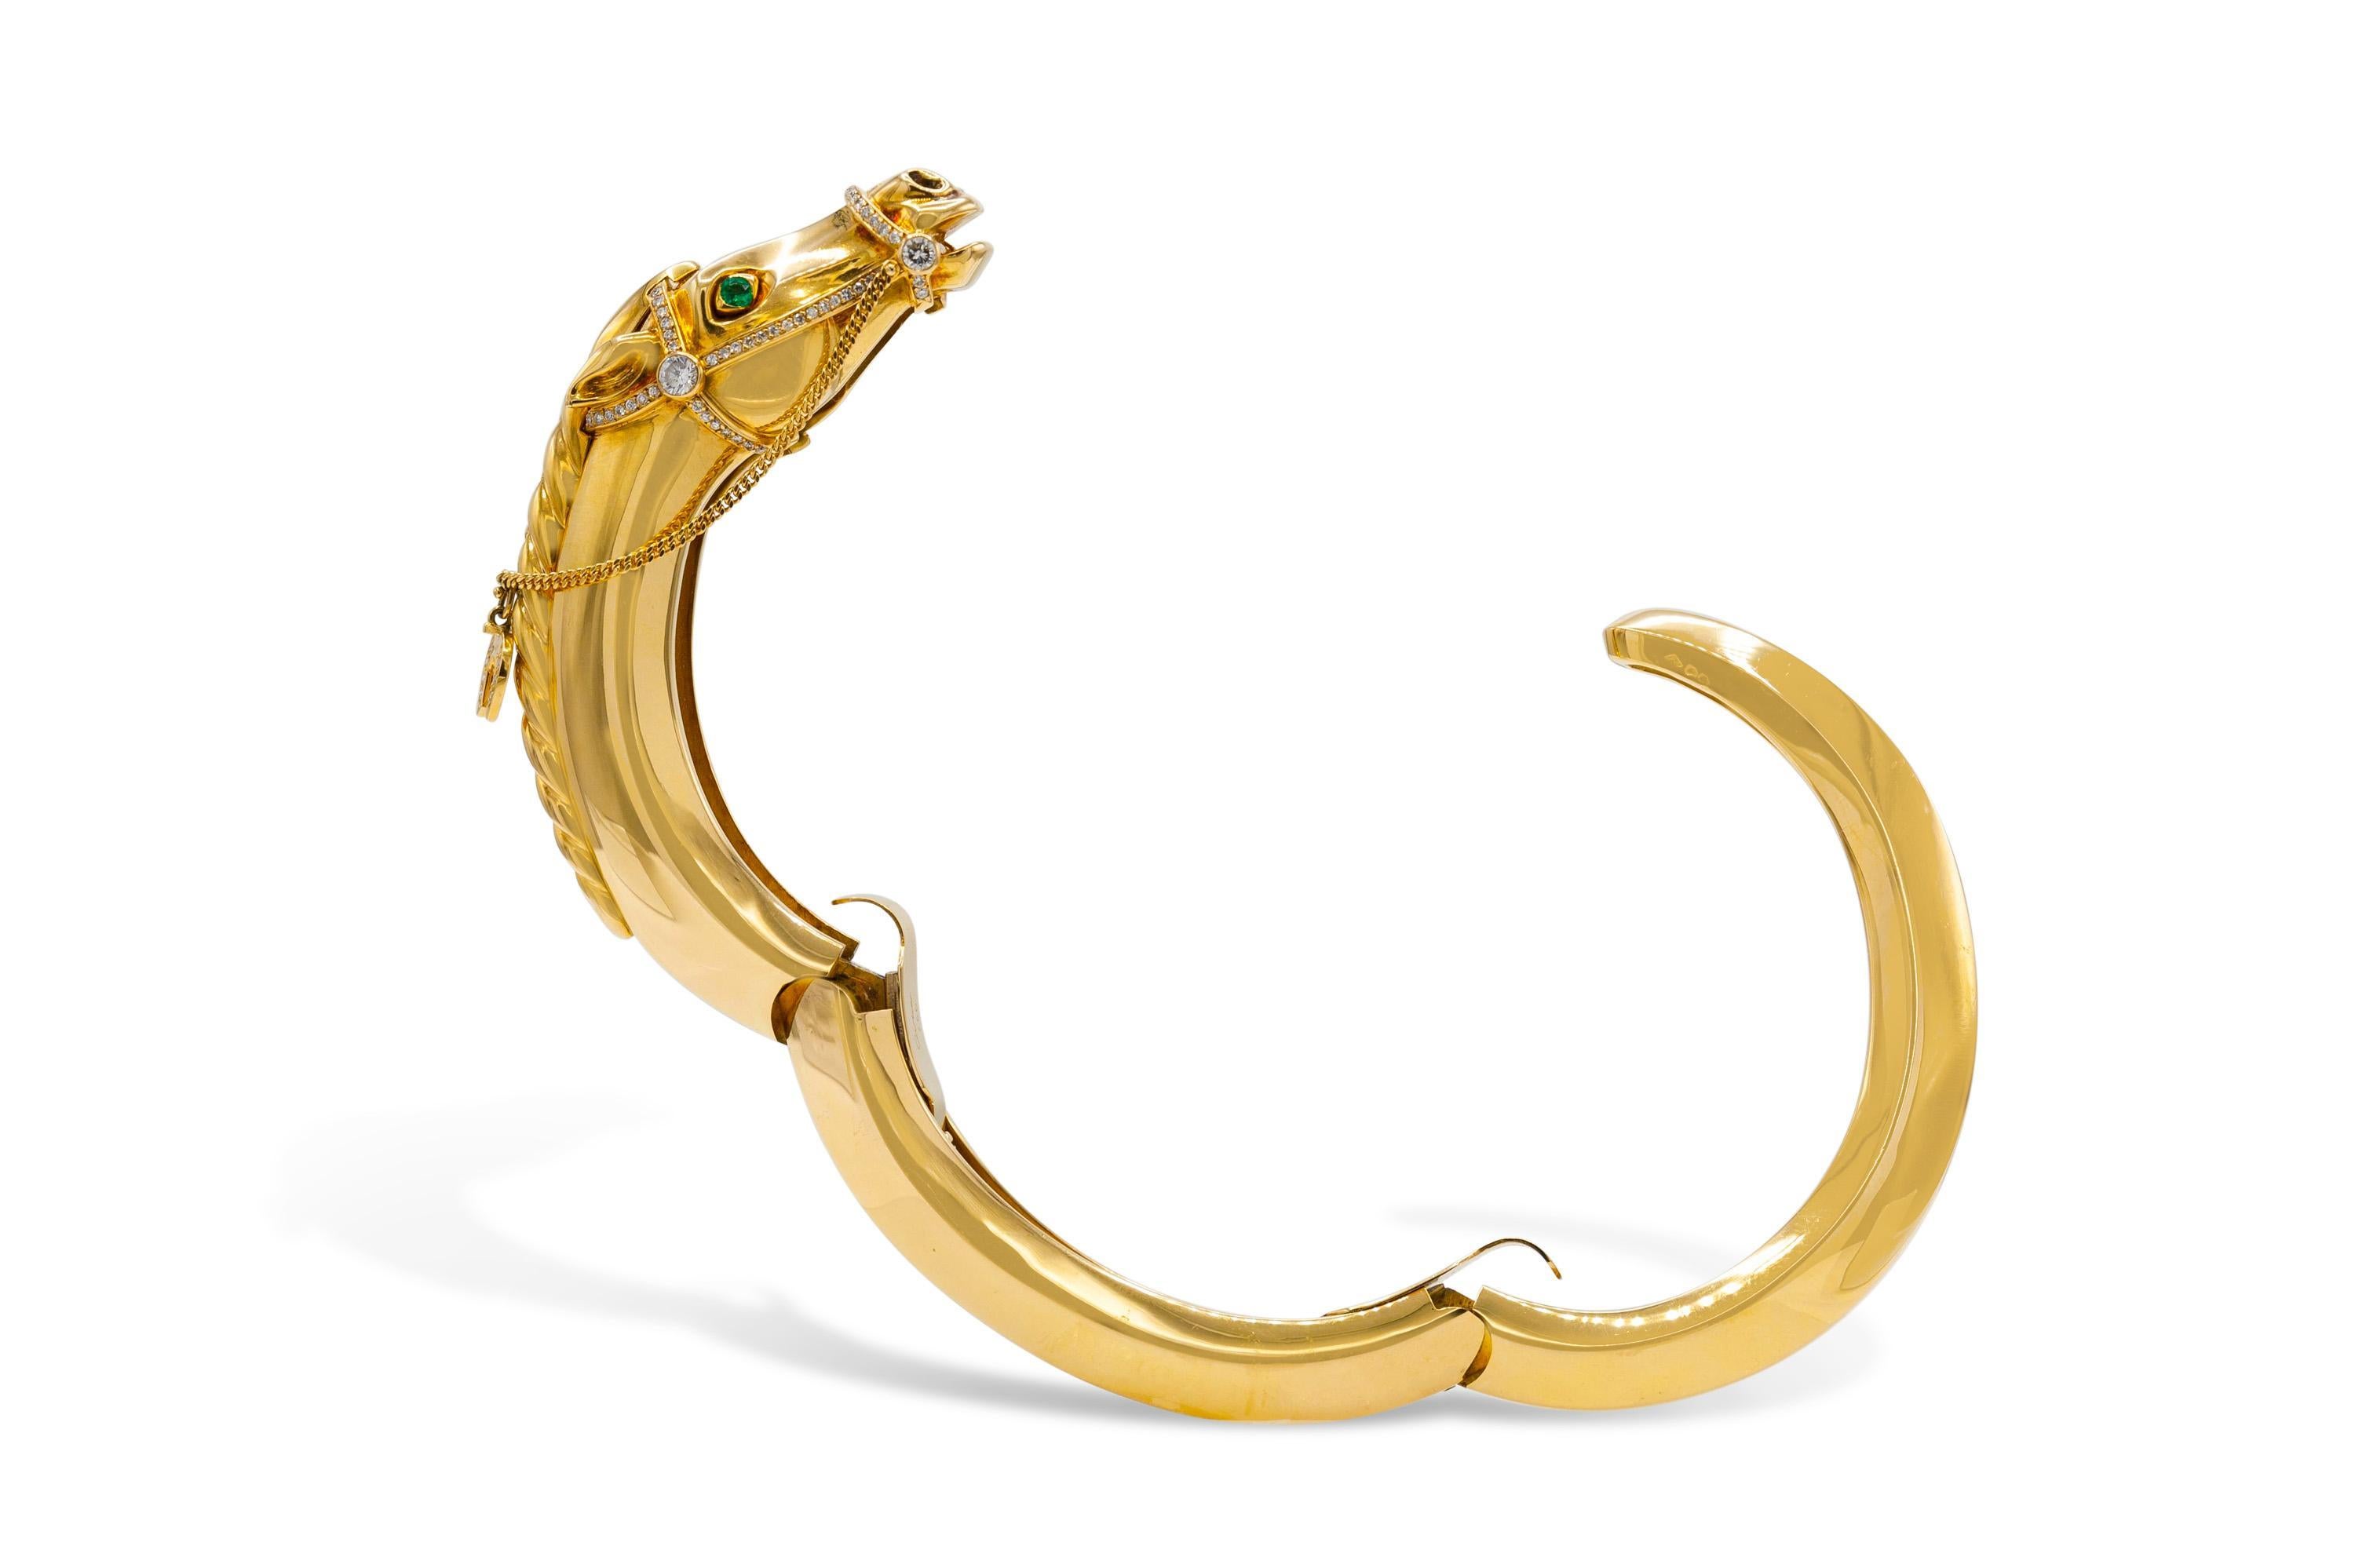 Finely crafted in 18K yellow gold featuring Diamonds and Emeralds for the eyes.
Signed by Cartier
Size 6 1/2 inches
Circa 1970s